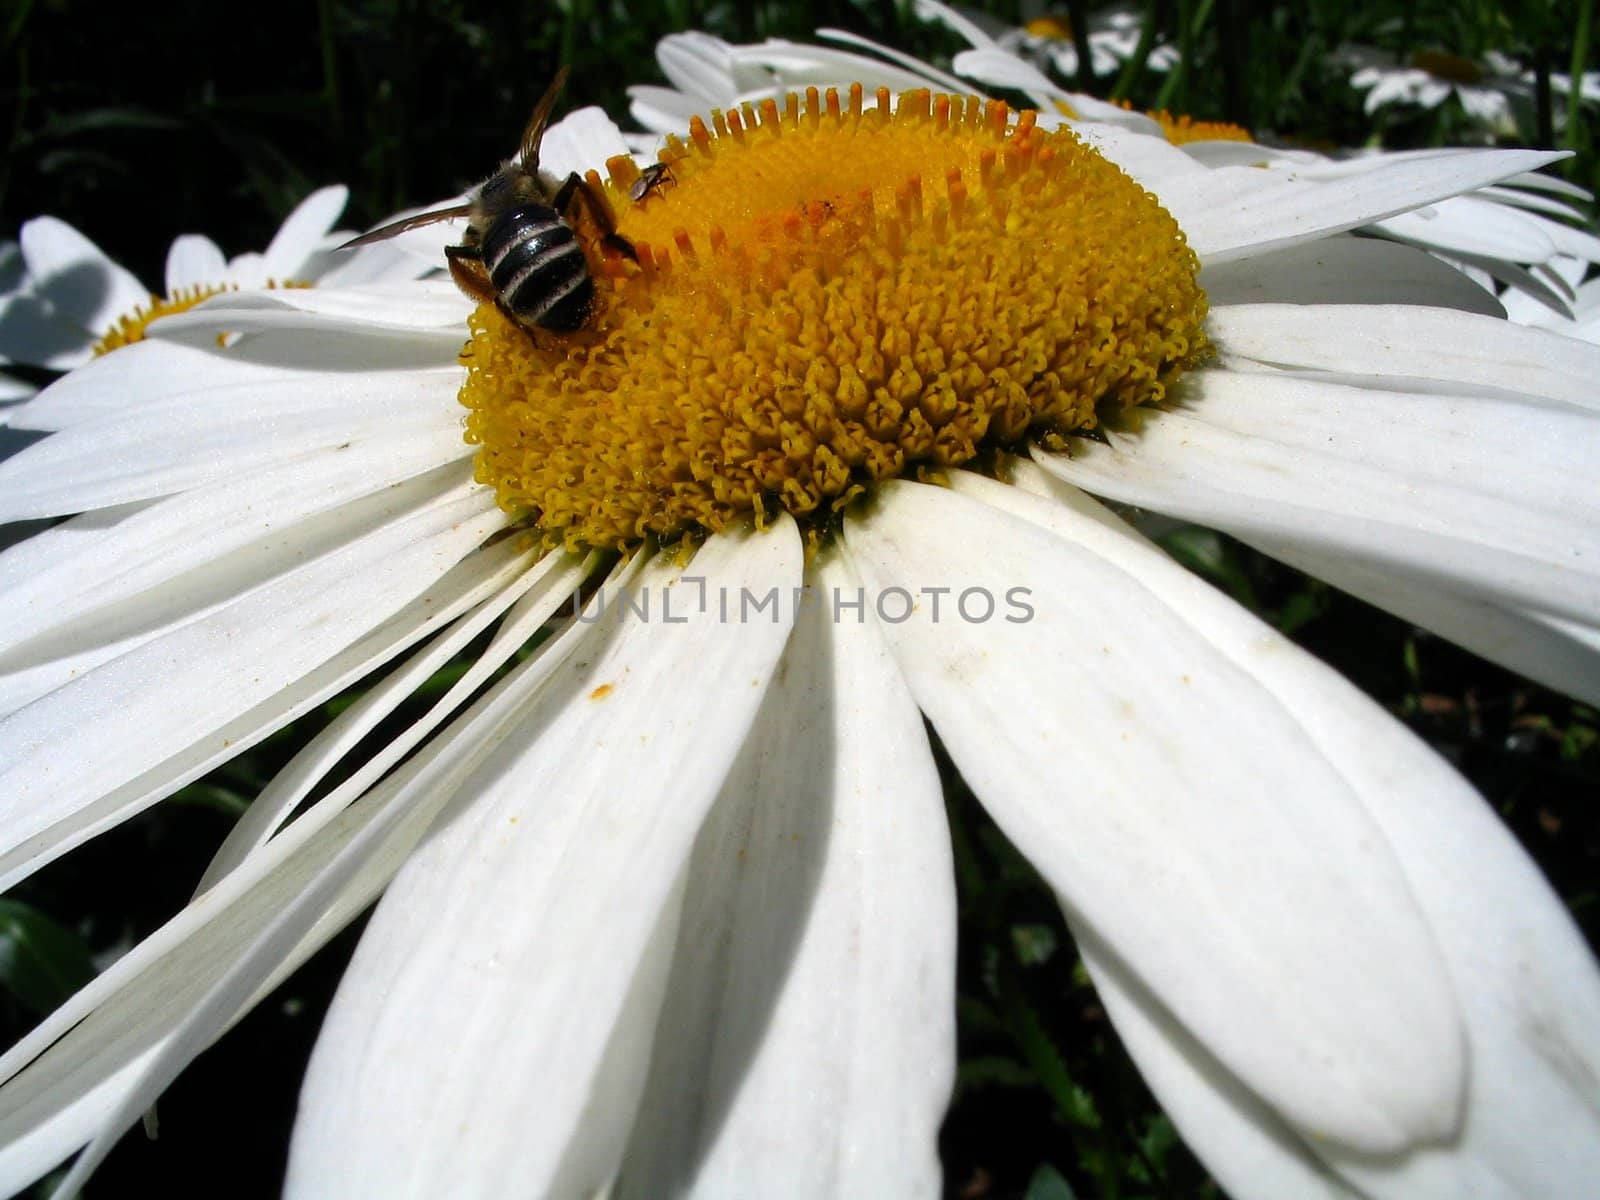 Daisywheel with bumblebee close-up